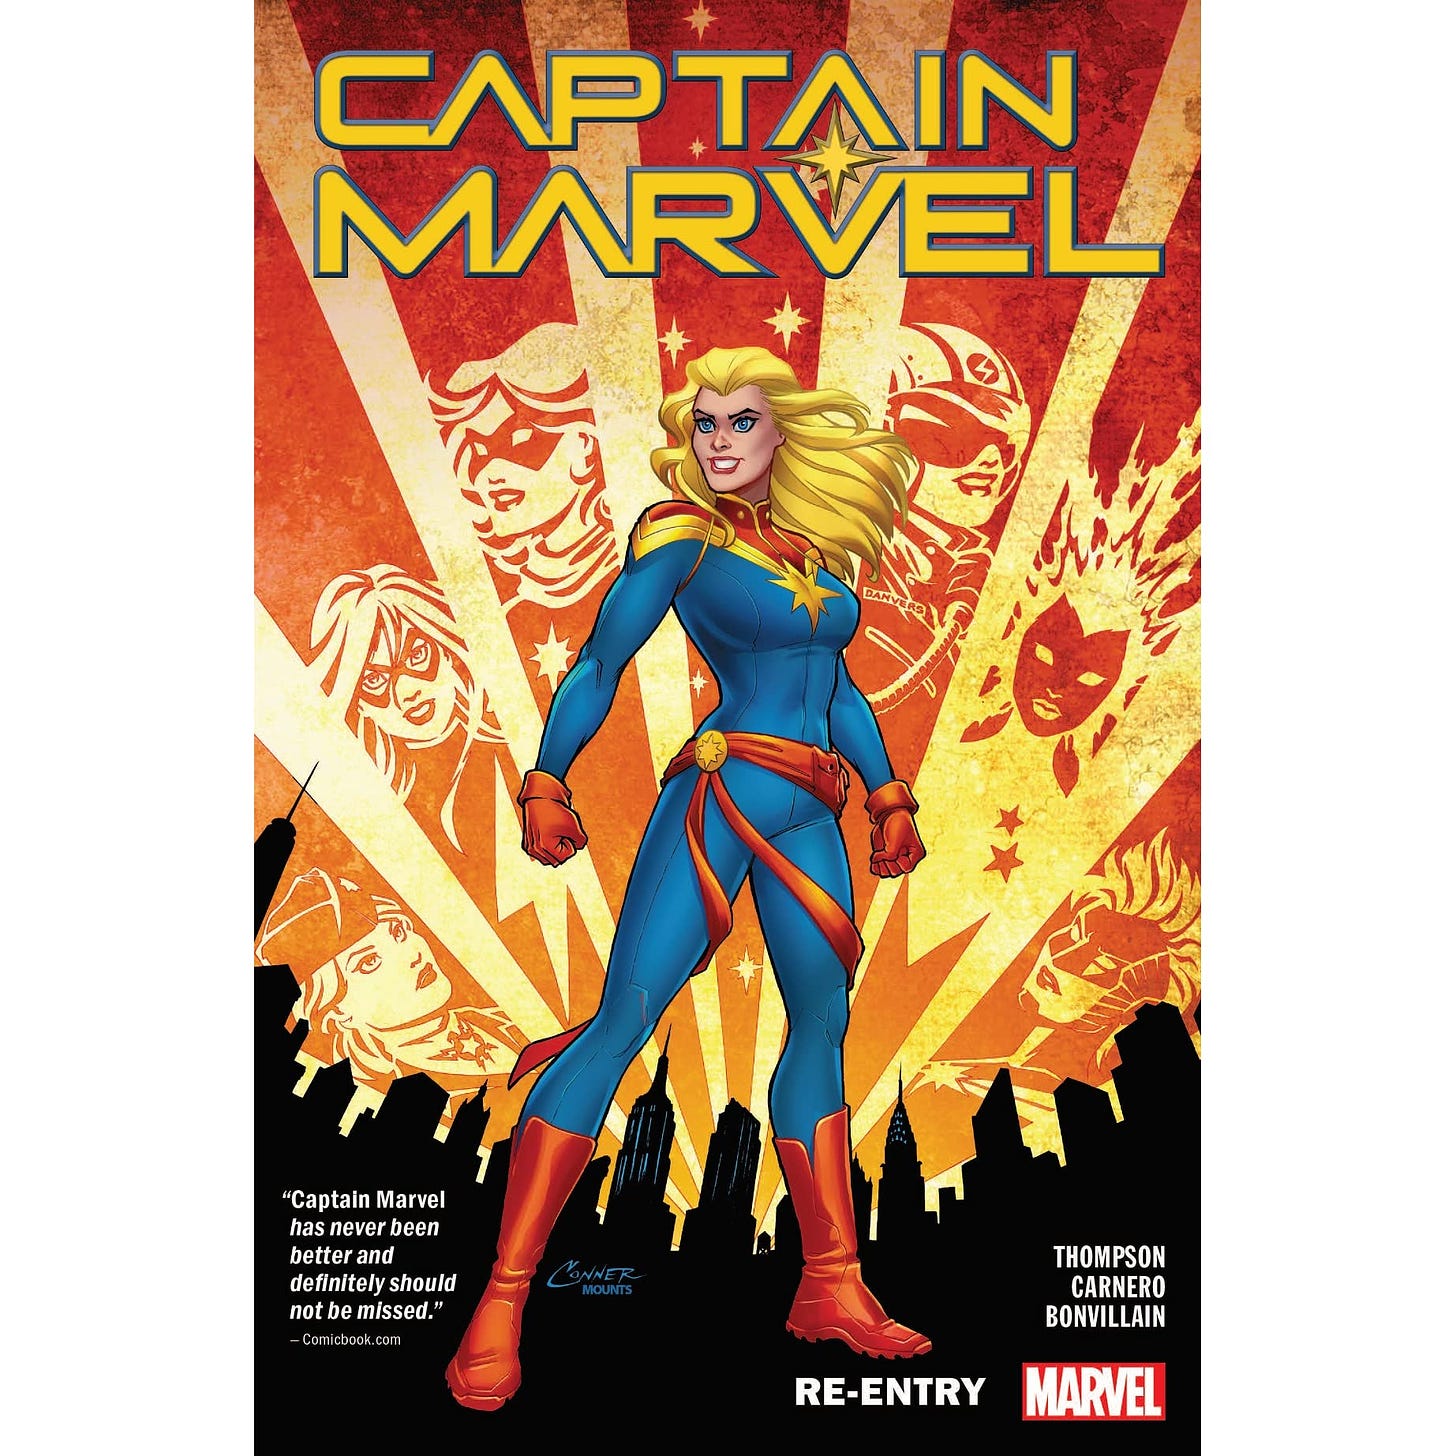 Captain Marvel, Vol. 1: Re-Entry by Kelly Thompson